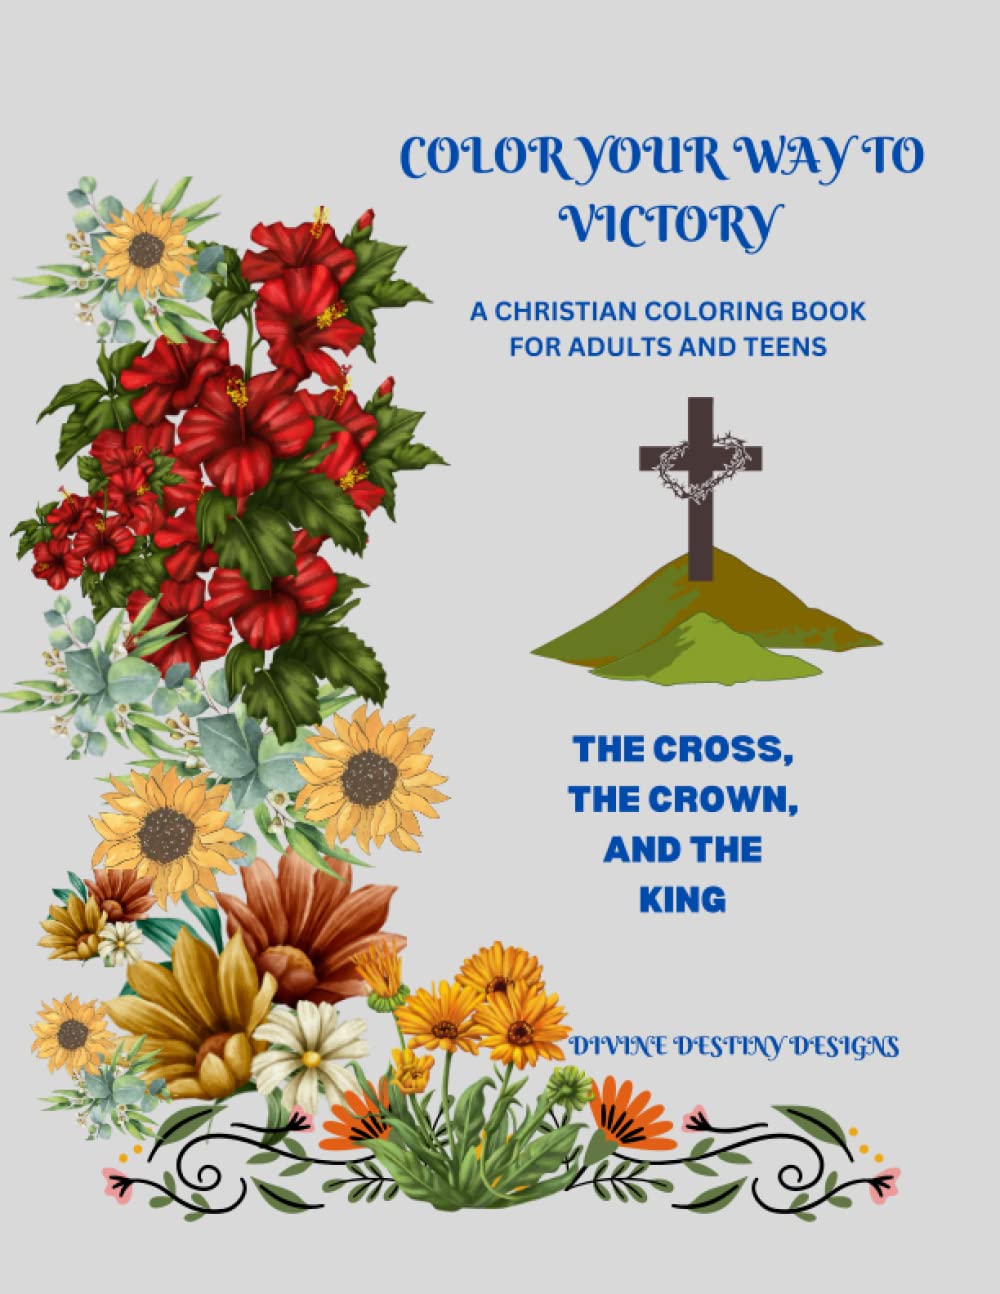 COLOR YOUR WAY TO VICTORY- A CHRISTIAN COLORING BOOK FOR ADULTS AND TEENS: THE CROSS, THE CROWN, AND THE KING